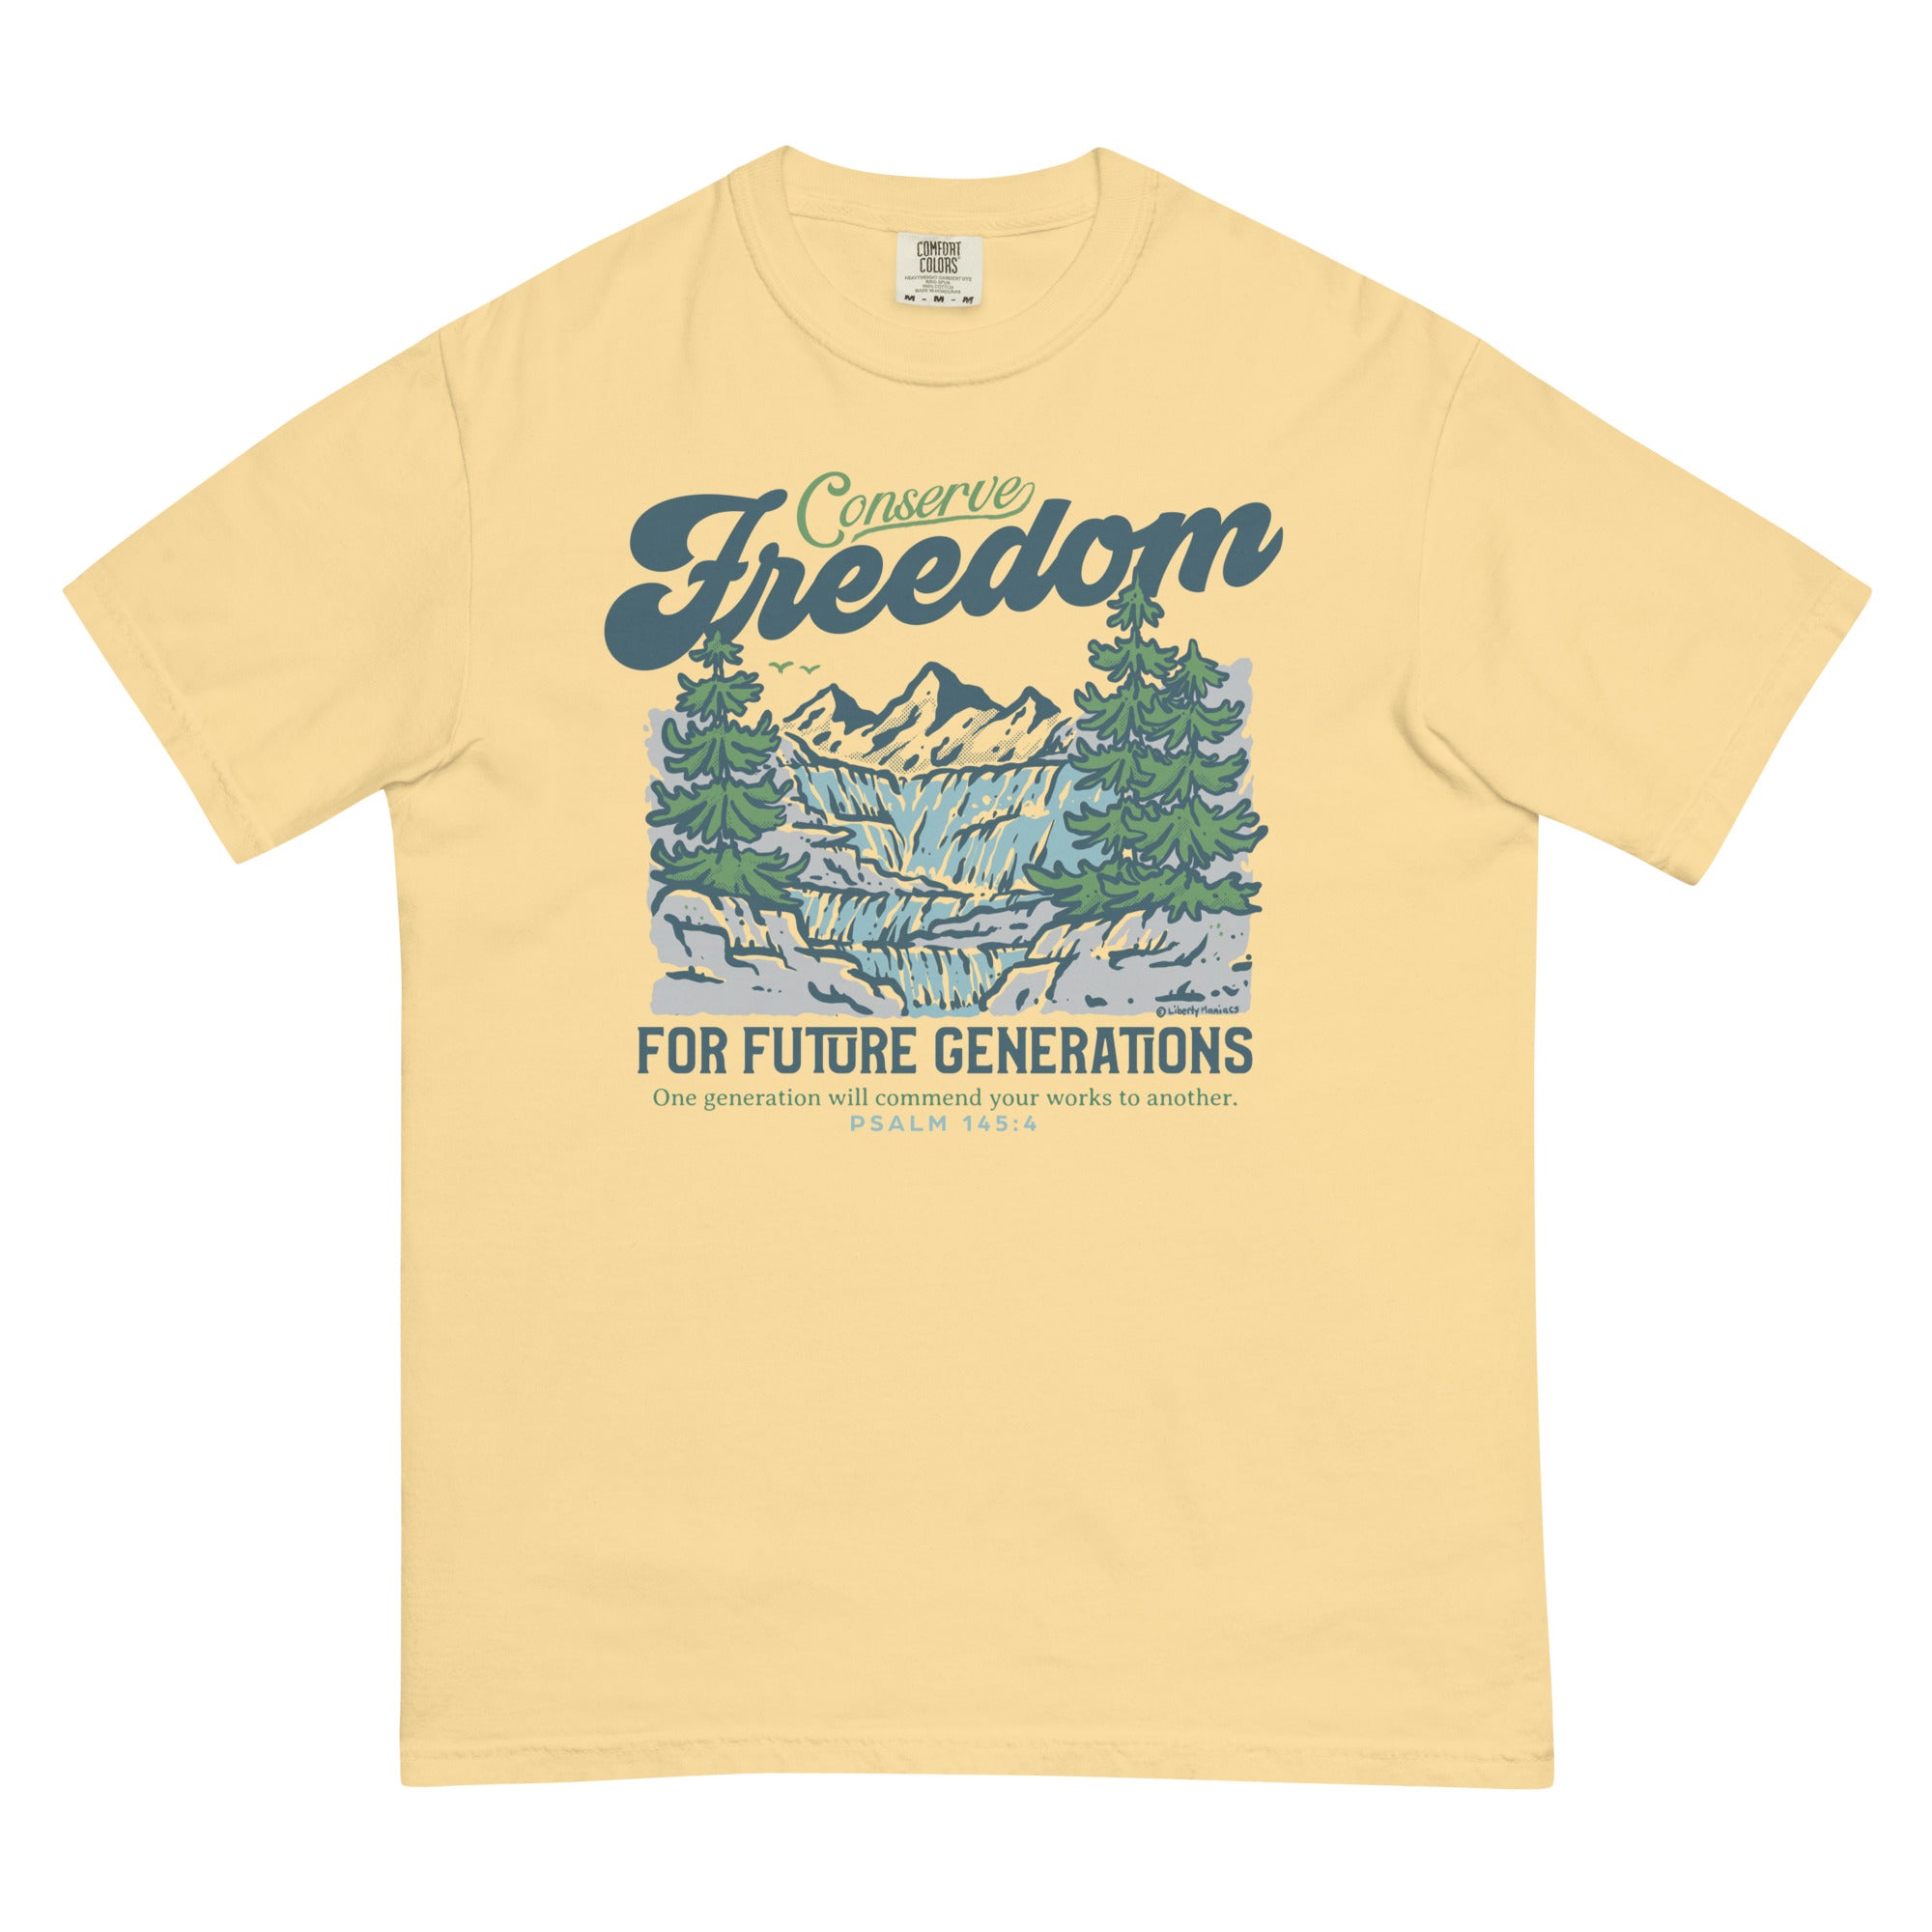 Conserve Freedom For Future Generations Garment-dyed Heavyweight T-Shirt